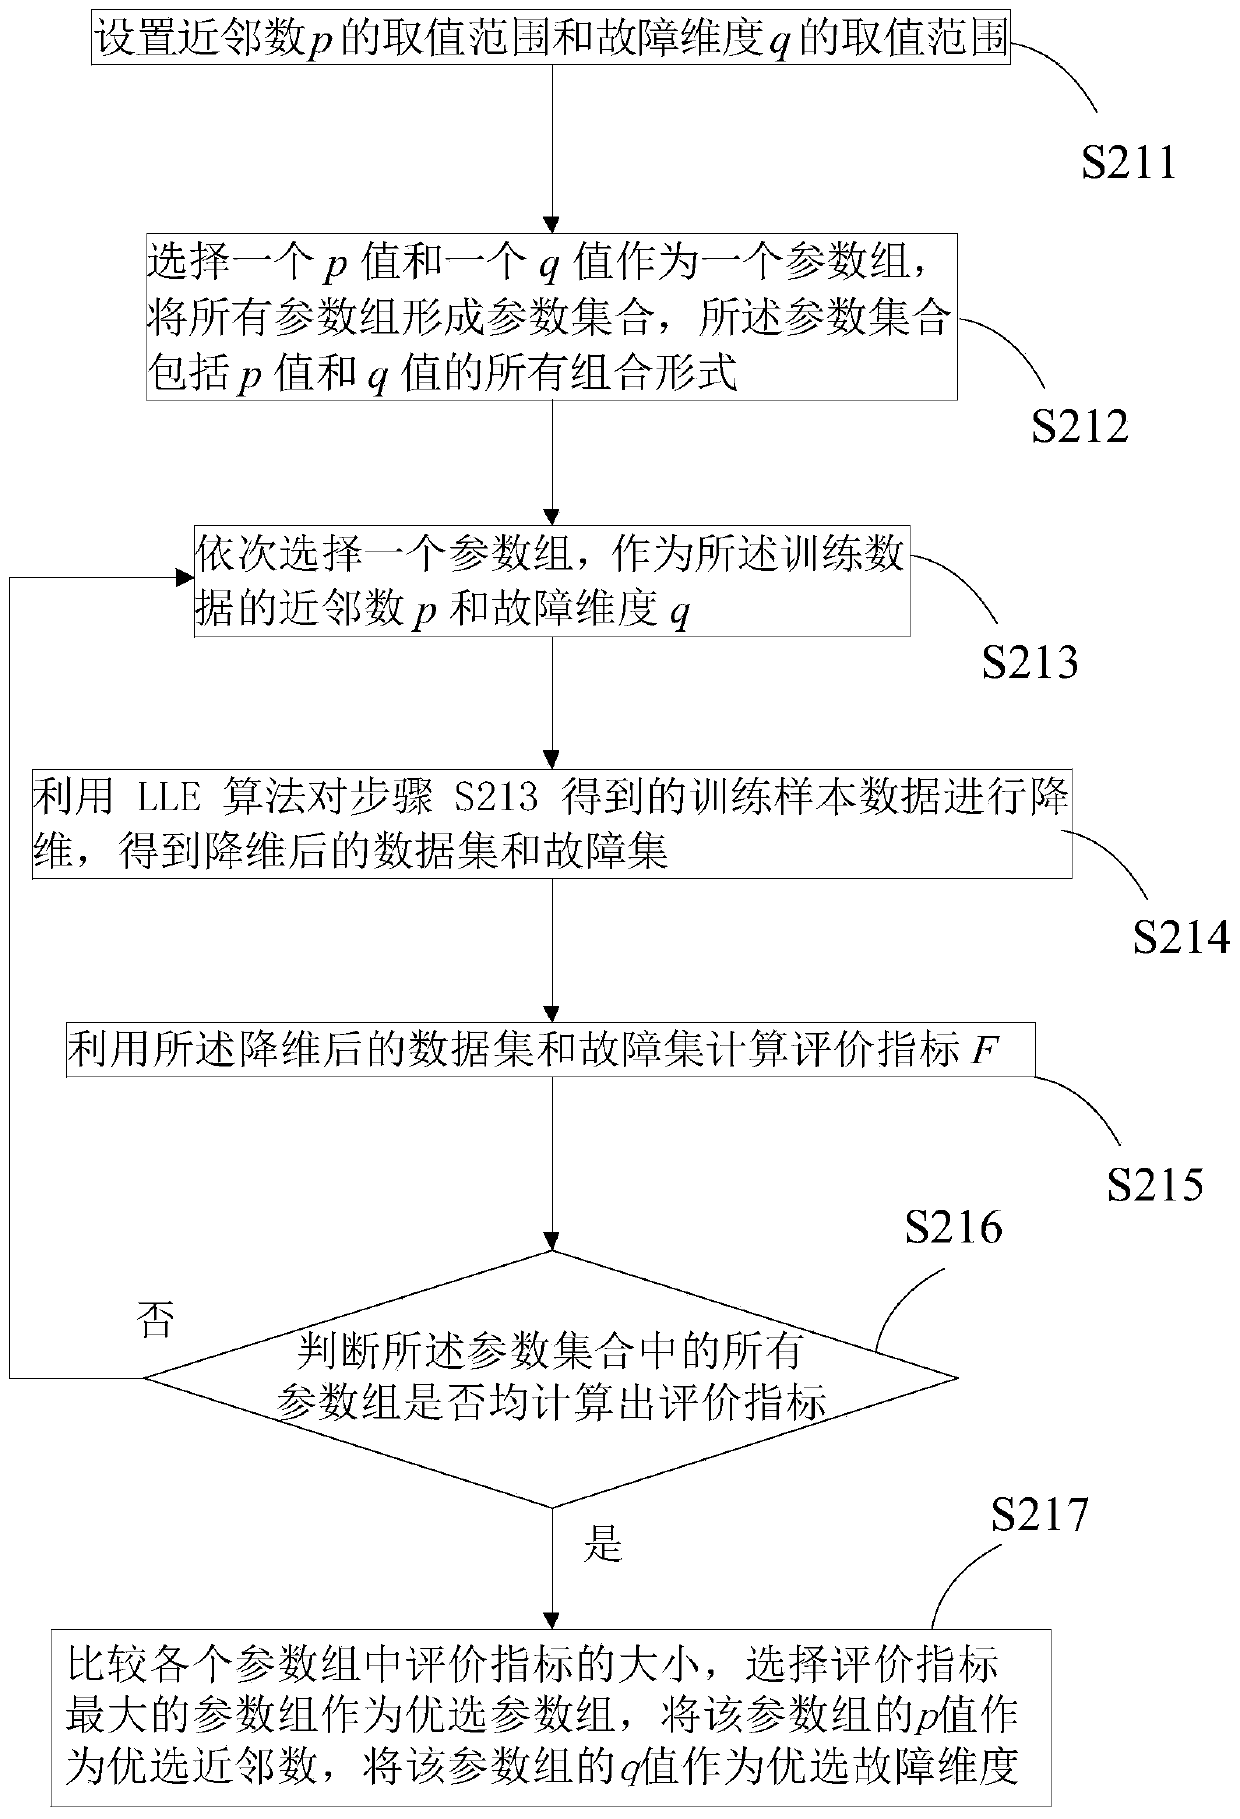 Bearing fault diagnosis method and device based on supervised LLE algorithm